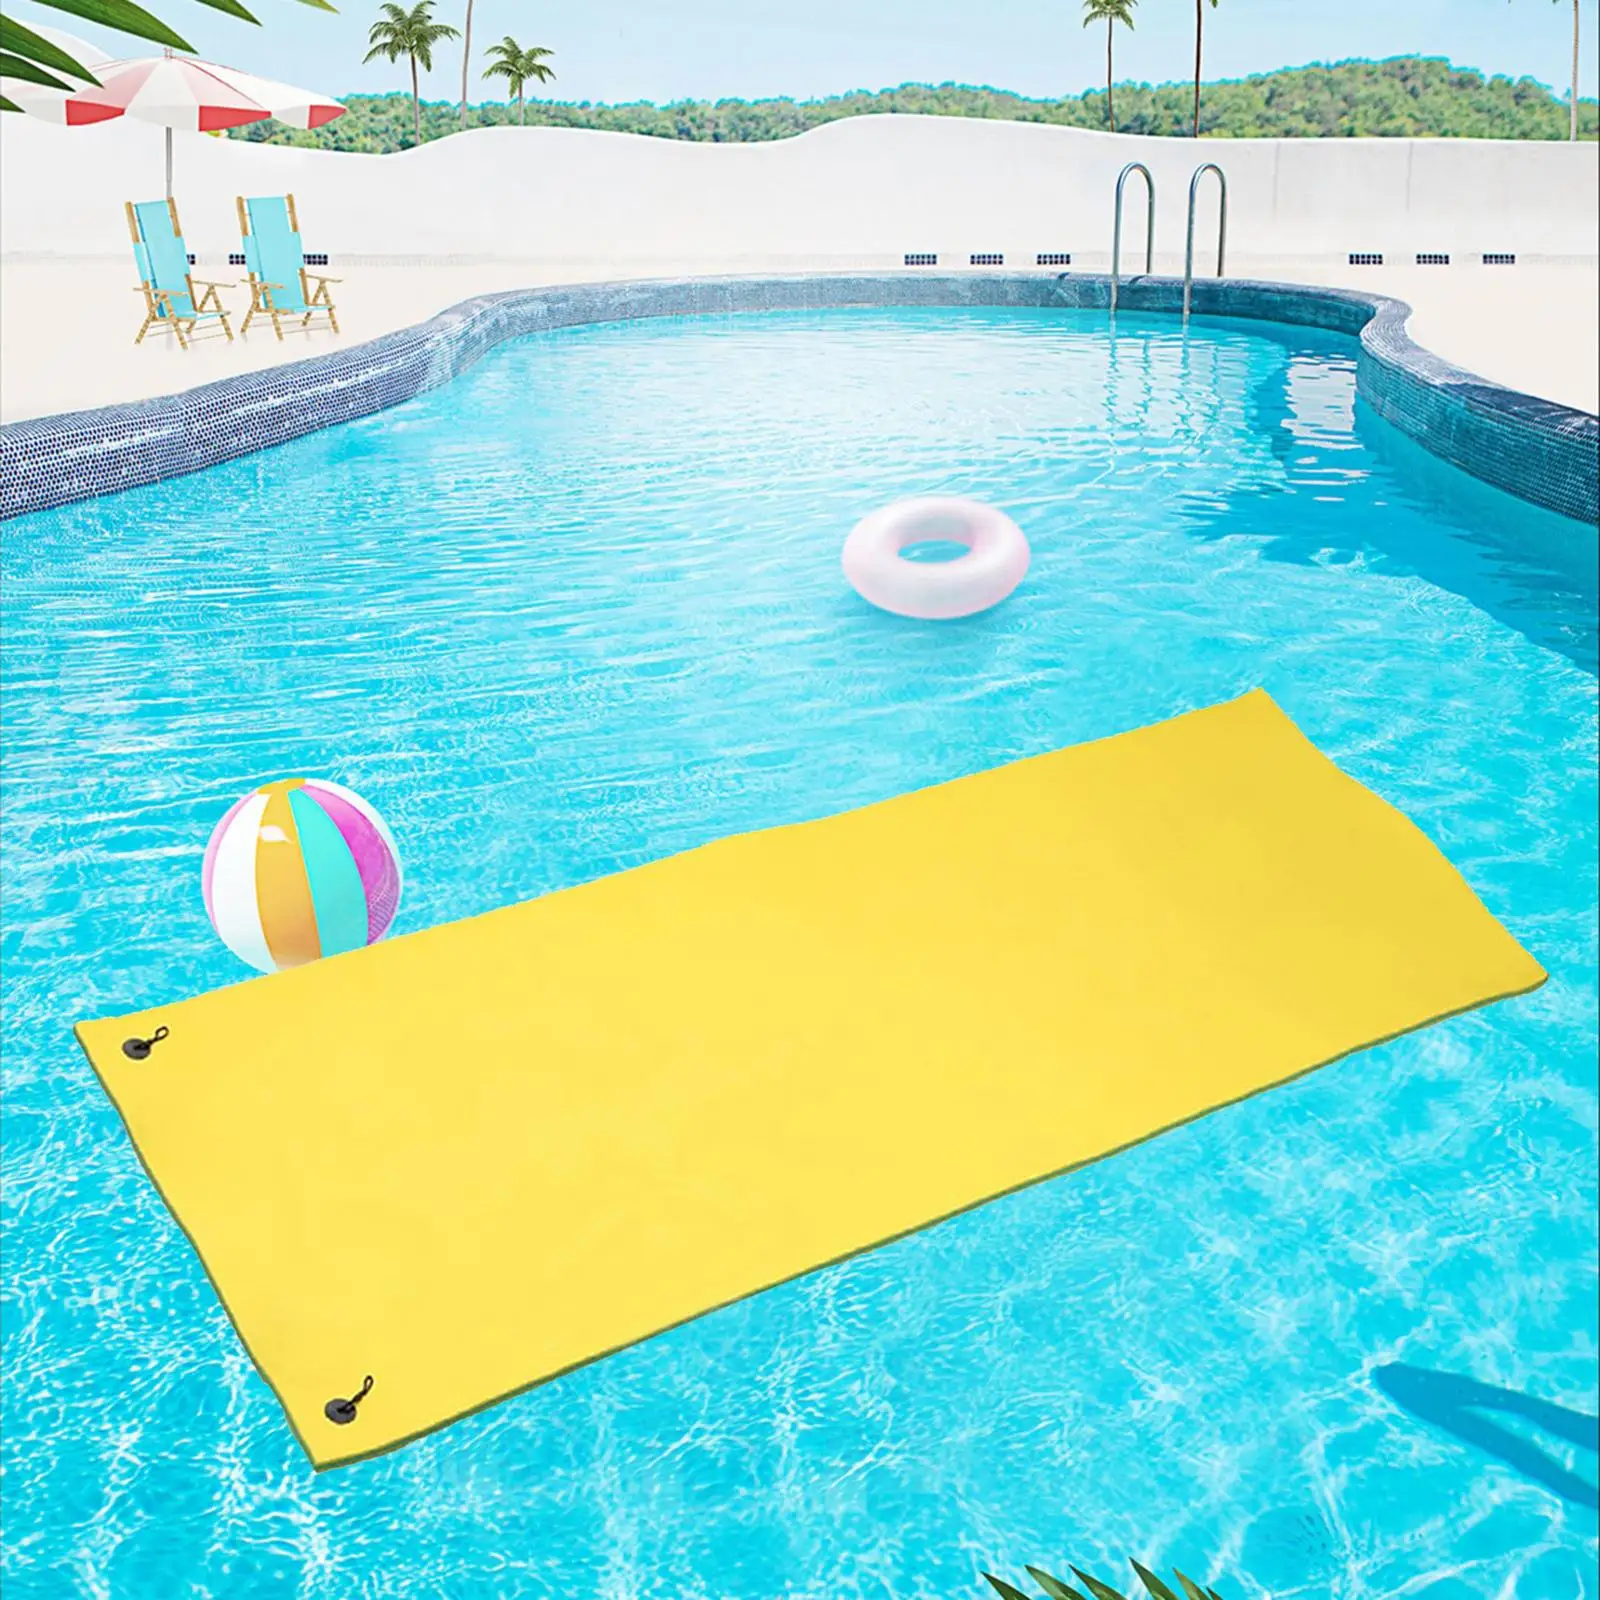 Pool Water Floating Mat 3 Layer Water Raft 270x90x3.3cm Tear Resistant for Kids, Teens, Adults Portable Xpe Foam Mat Roll up Pad